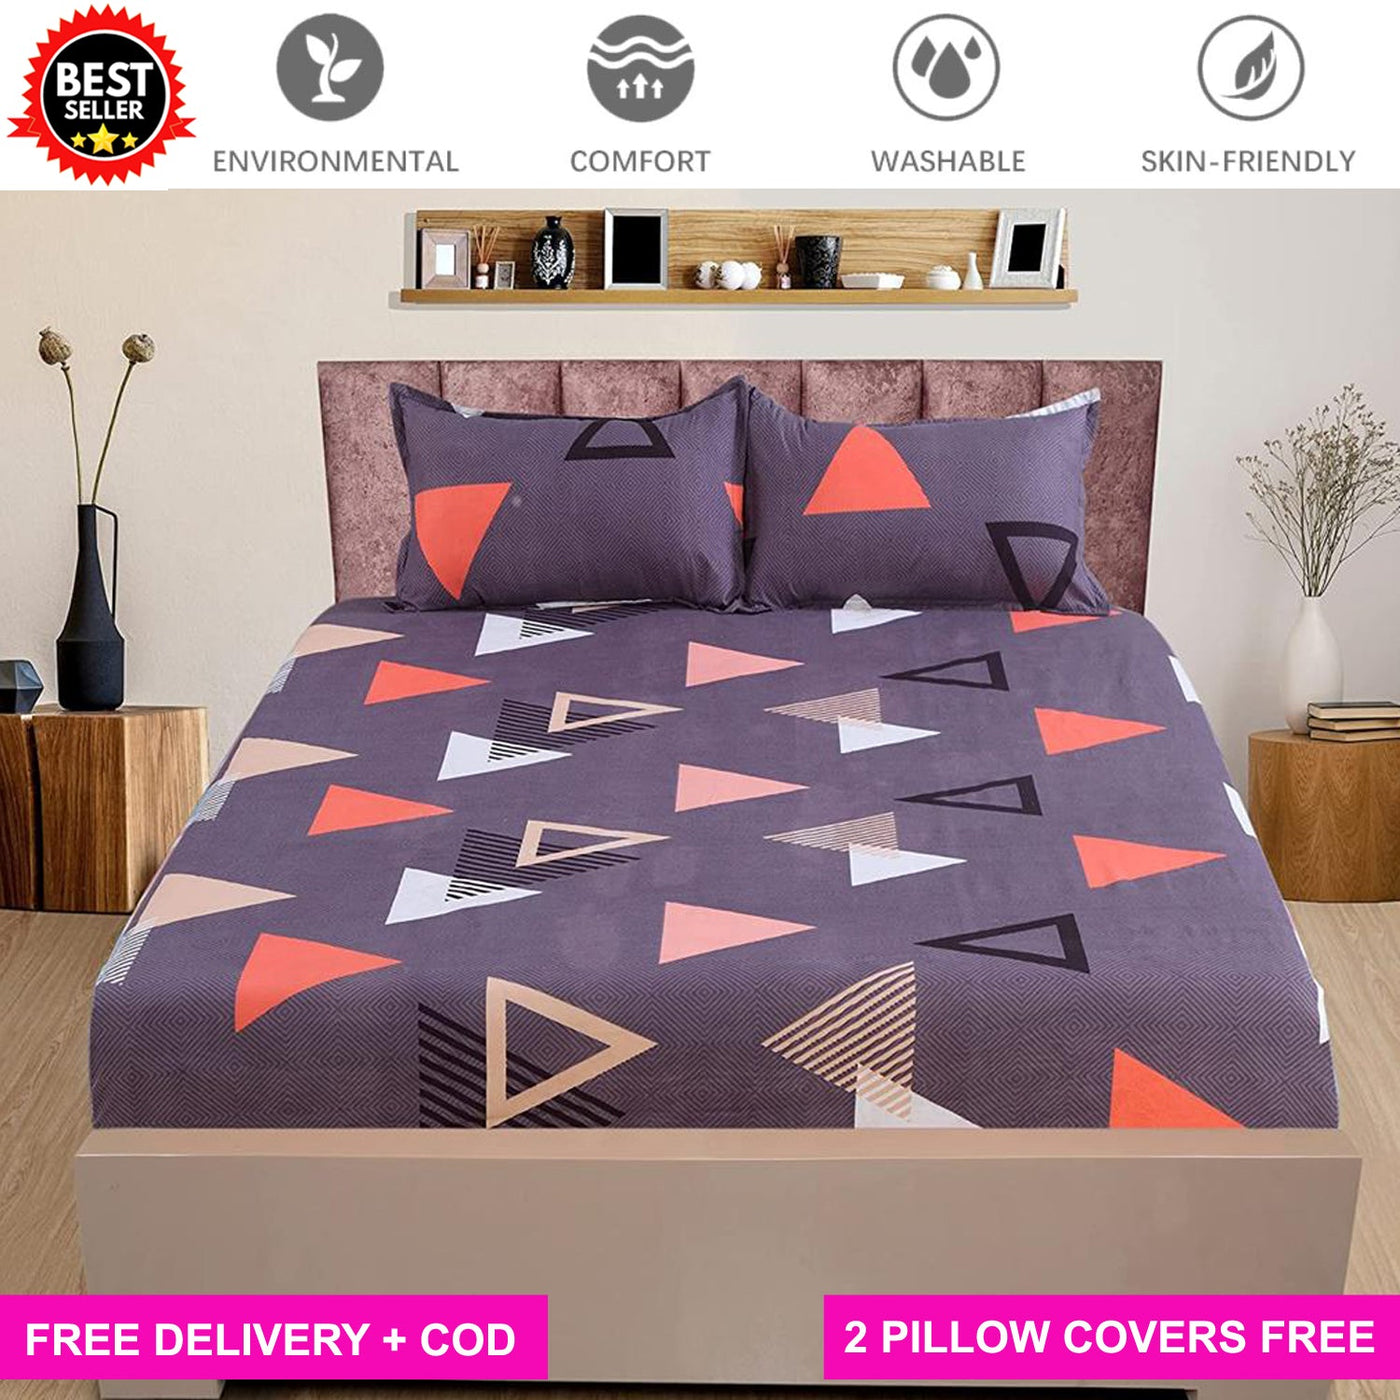 Cotton Elastic Fitted King Size Bedsheet with 2 Pillow Covers - Fits with any Beds & Mattresses Great Happy IN Grey Triangle KING SIZE 